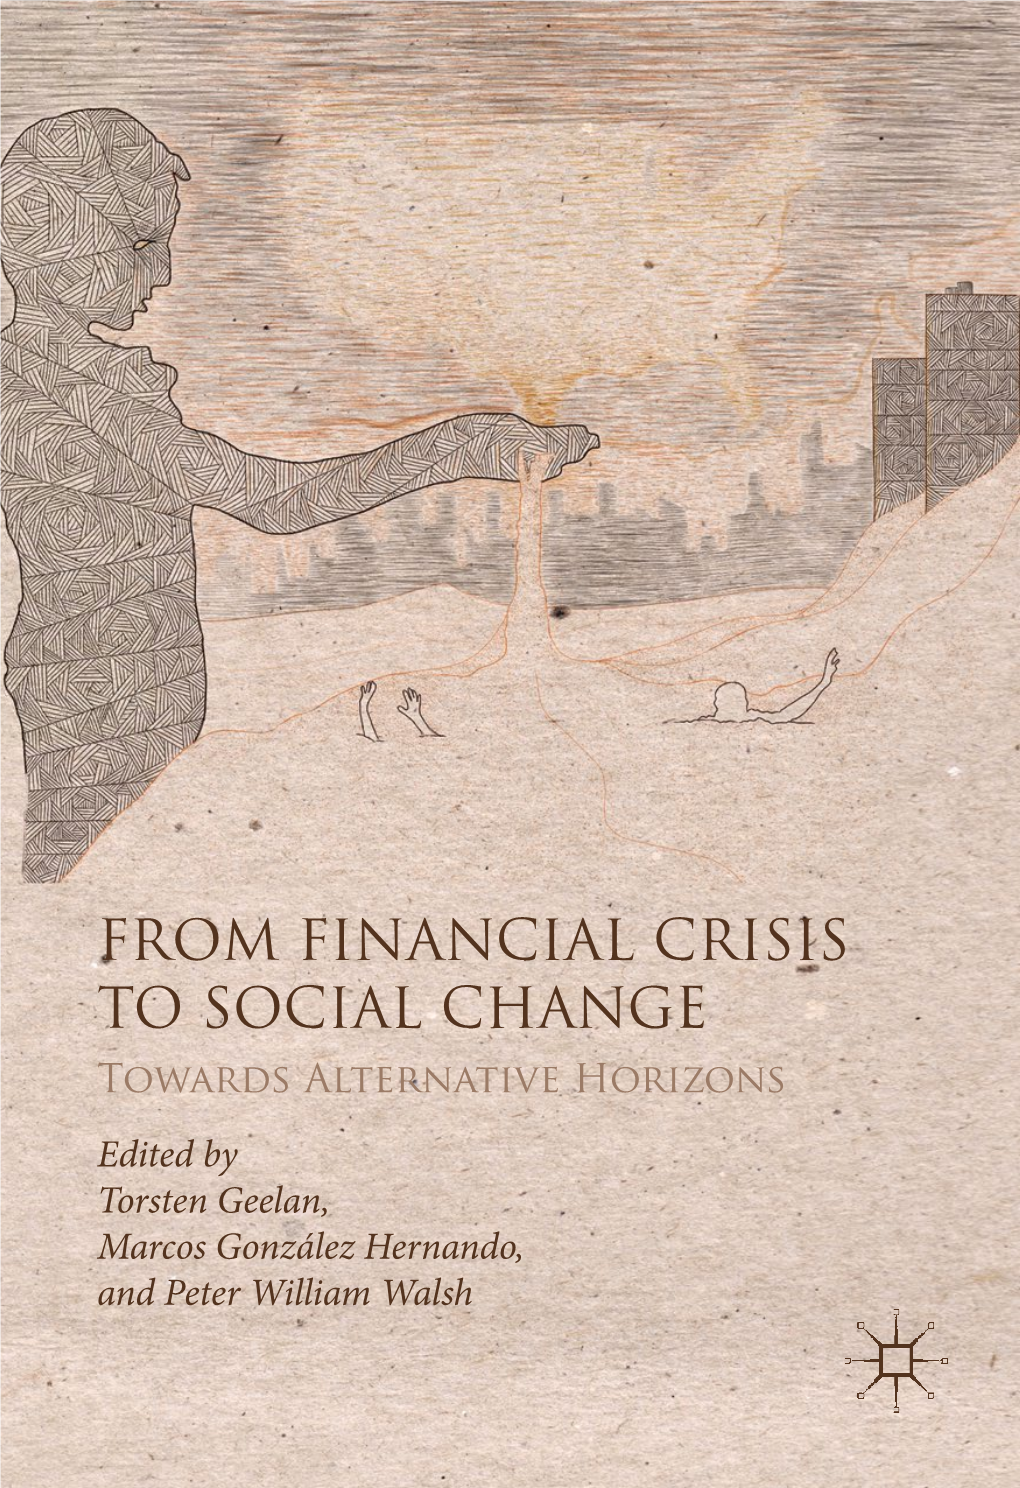 FROM FINANCIAL CRISIS to SOCIAL CHANGE Towards Alternative Horizons